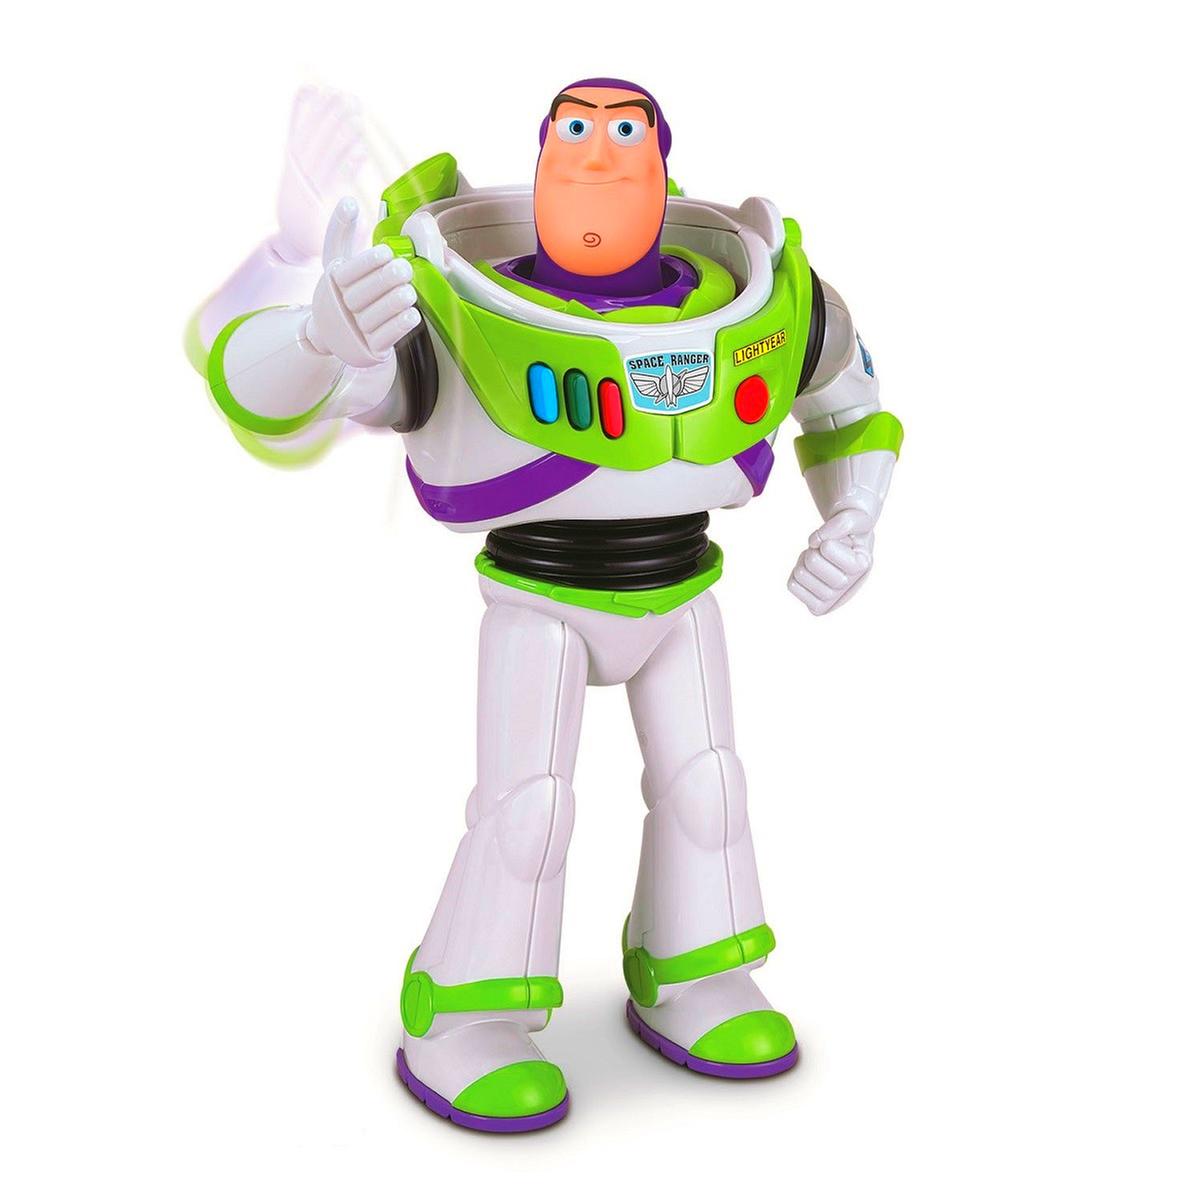 Toy Story - Buzz Lightyear Acción Karate Toy Story 4 | Toy Story |  Toys"R"Us España